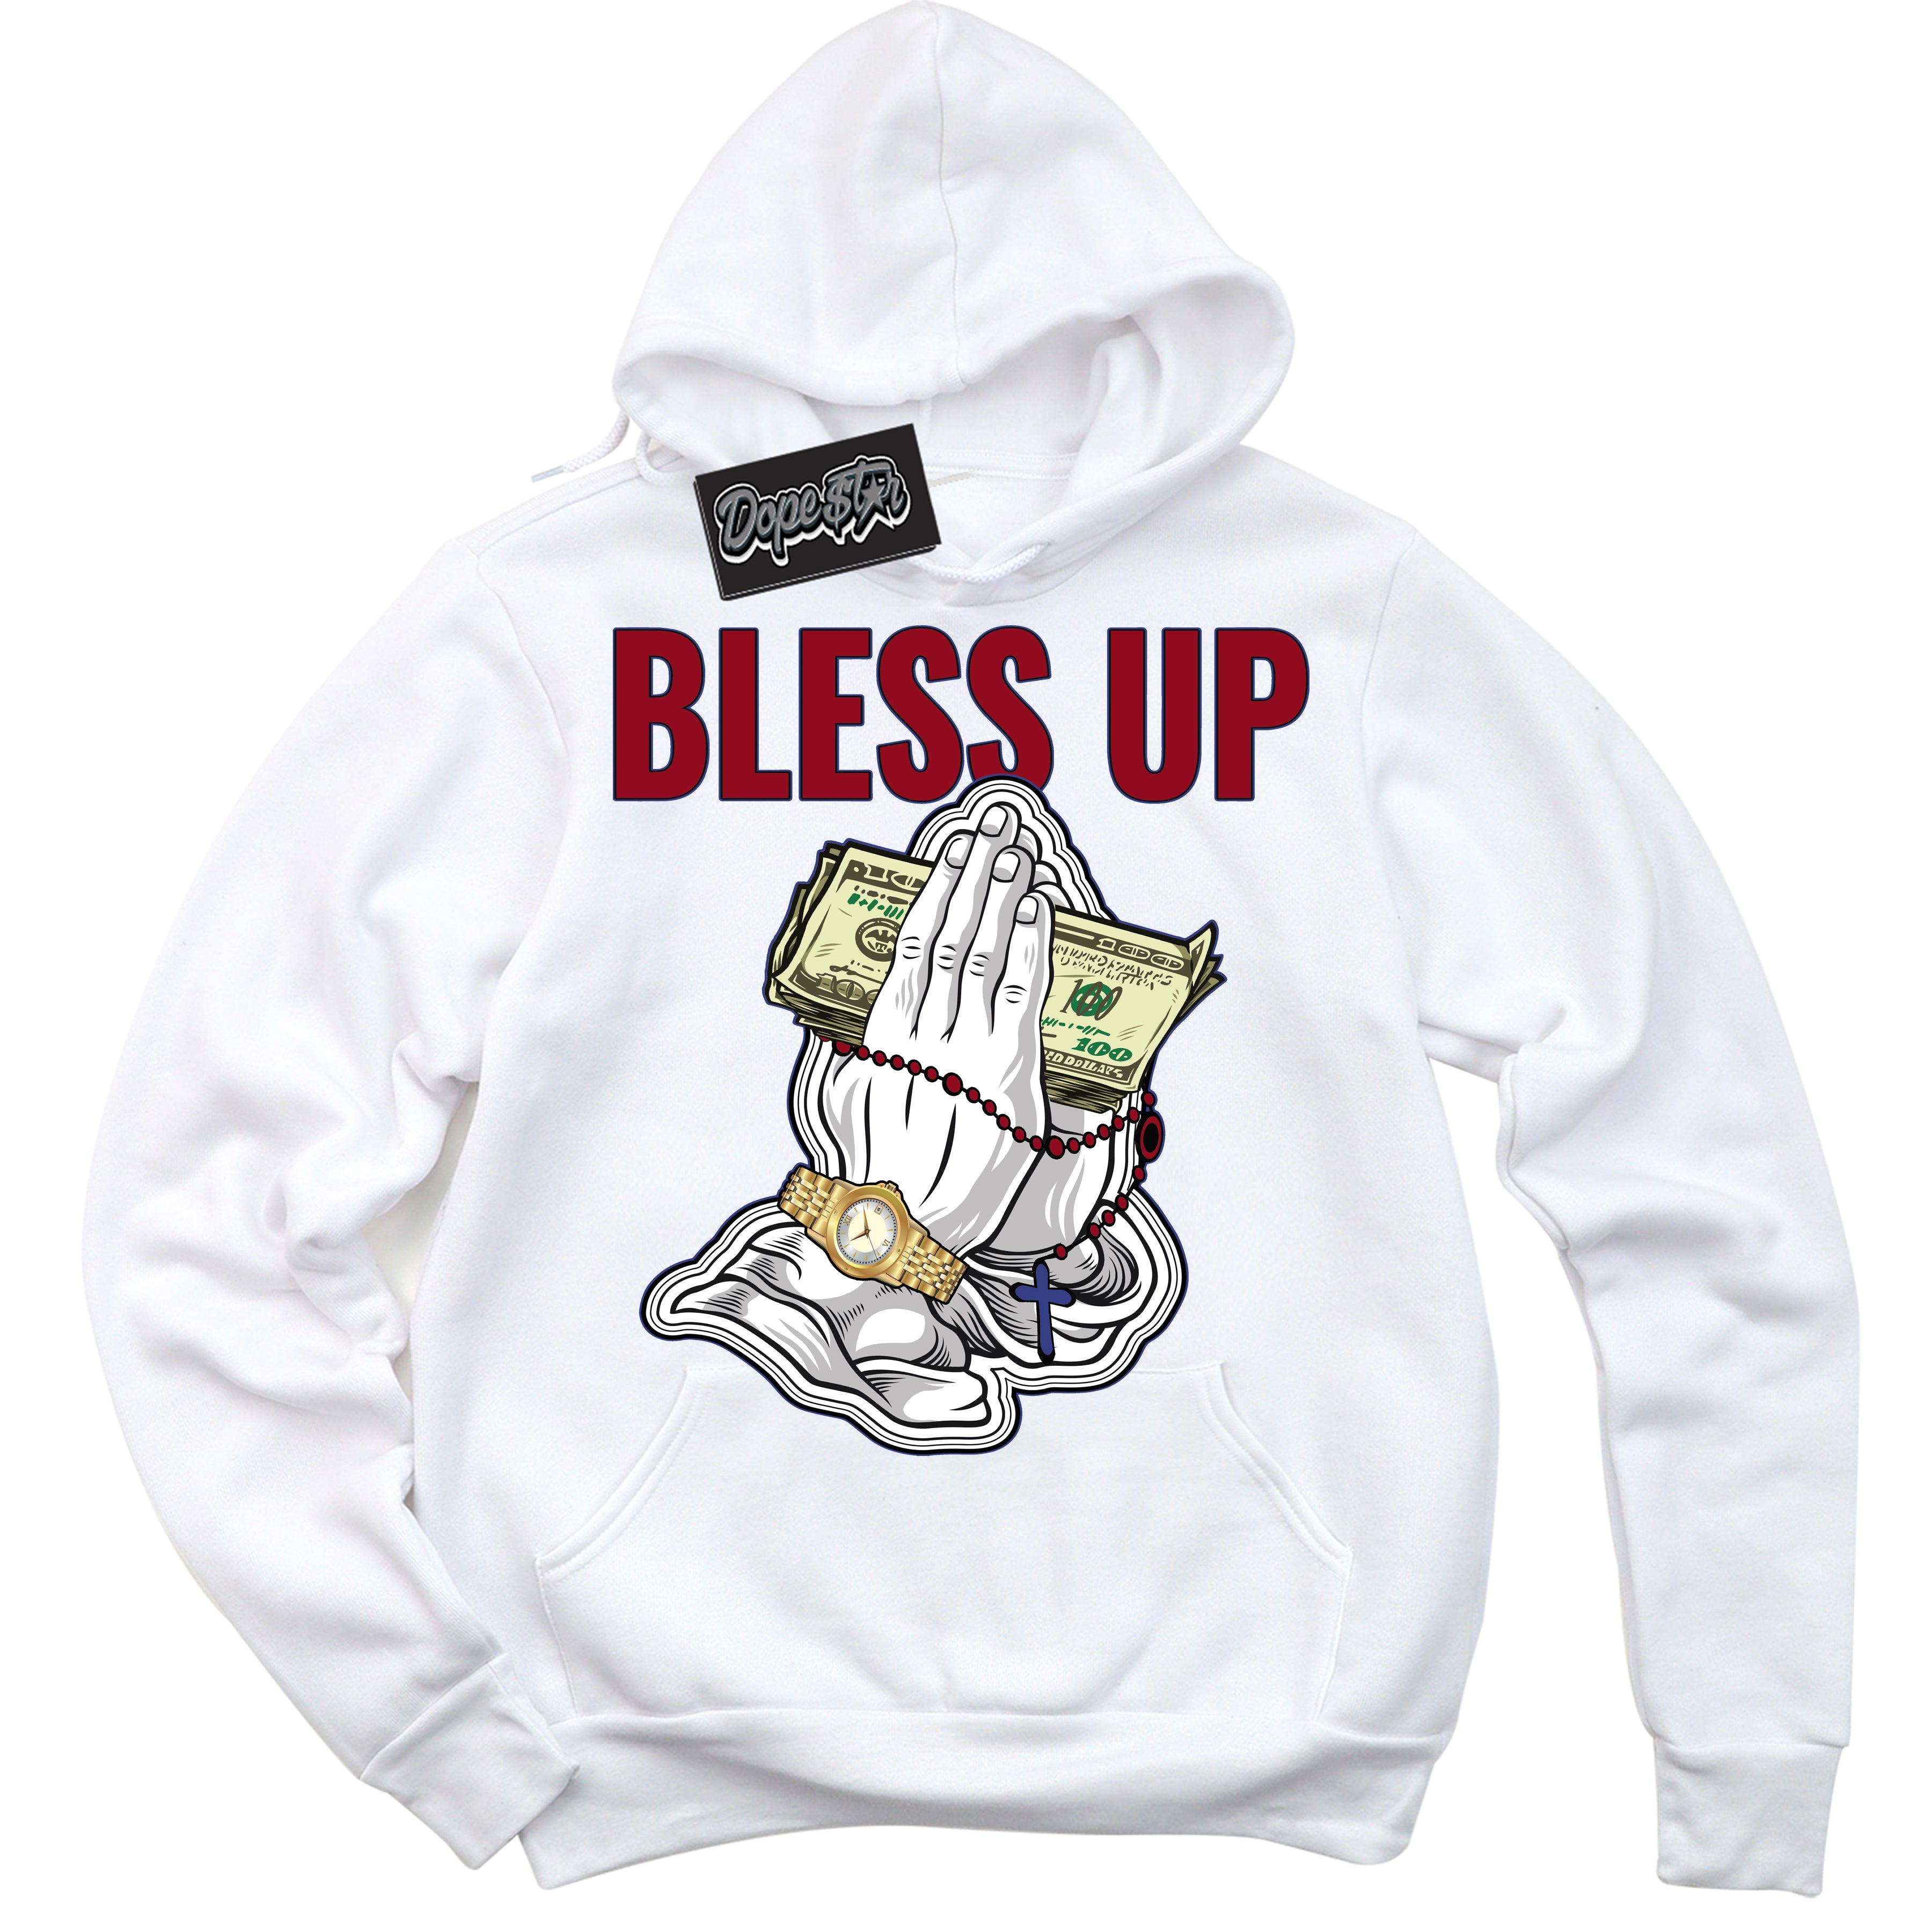 Cool White Hoodie with “ Bless Up ”  design that Perfectly Matches Playoffs 8s Sneakers.